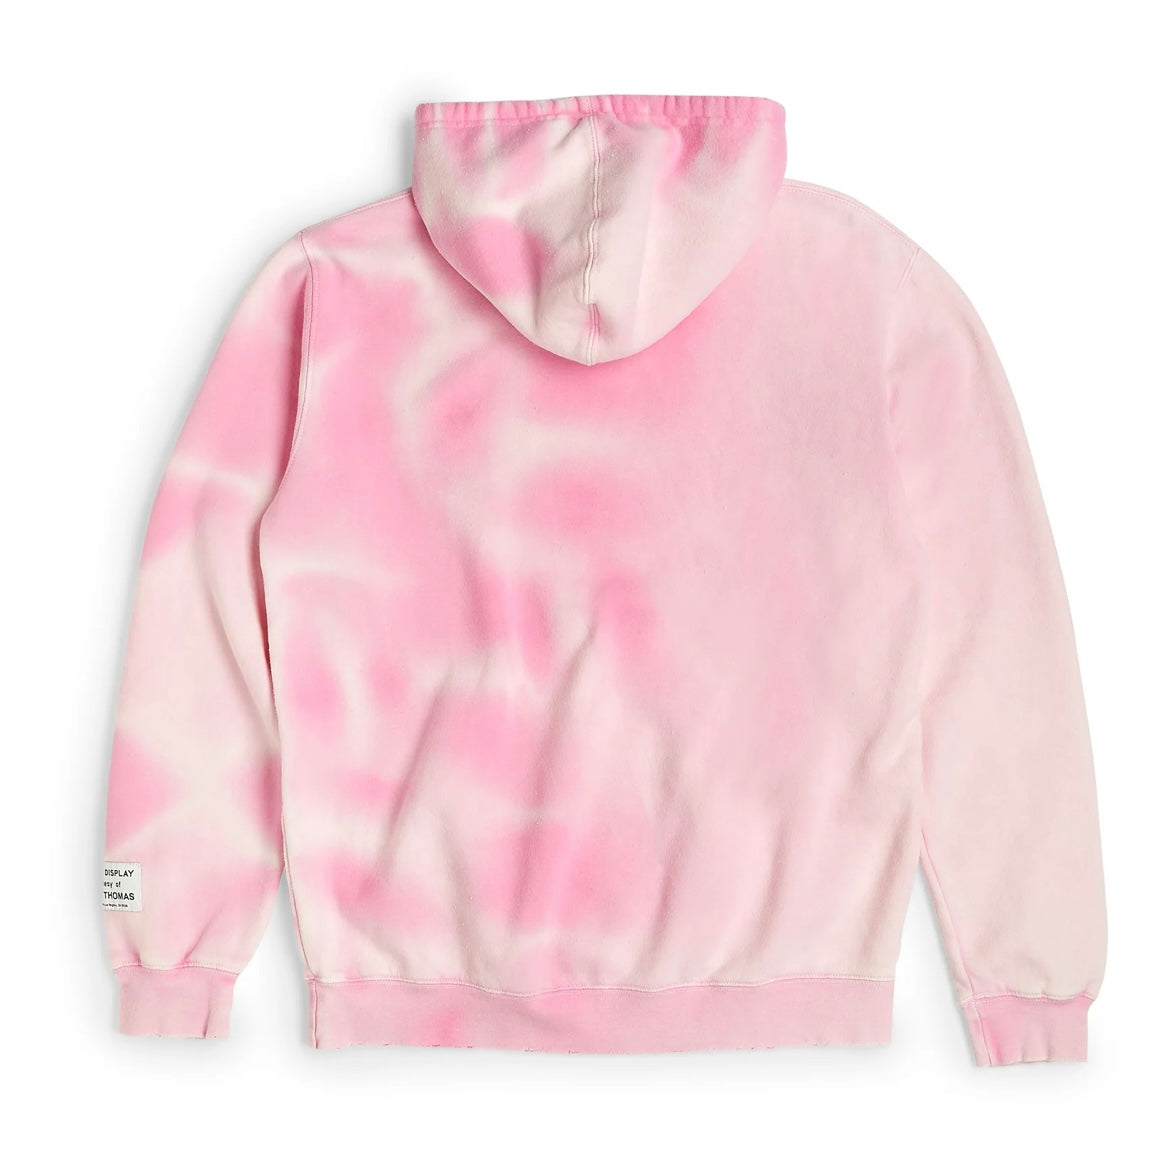 Gallery Dept Pink Sunfaded Hoodie Back View